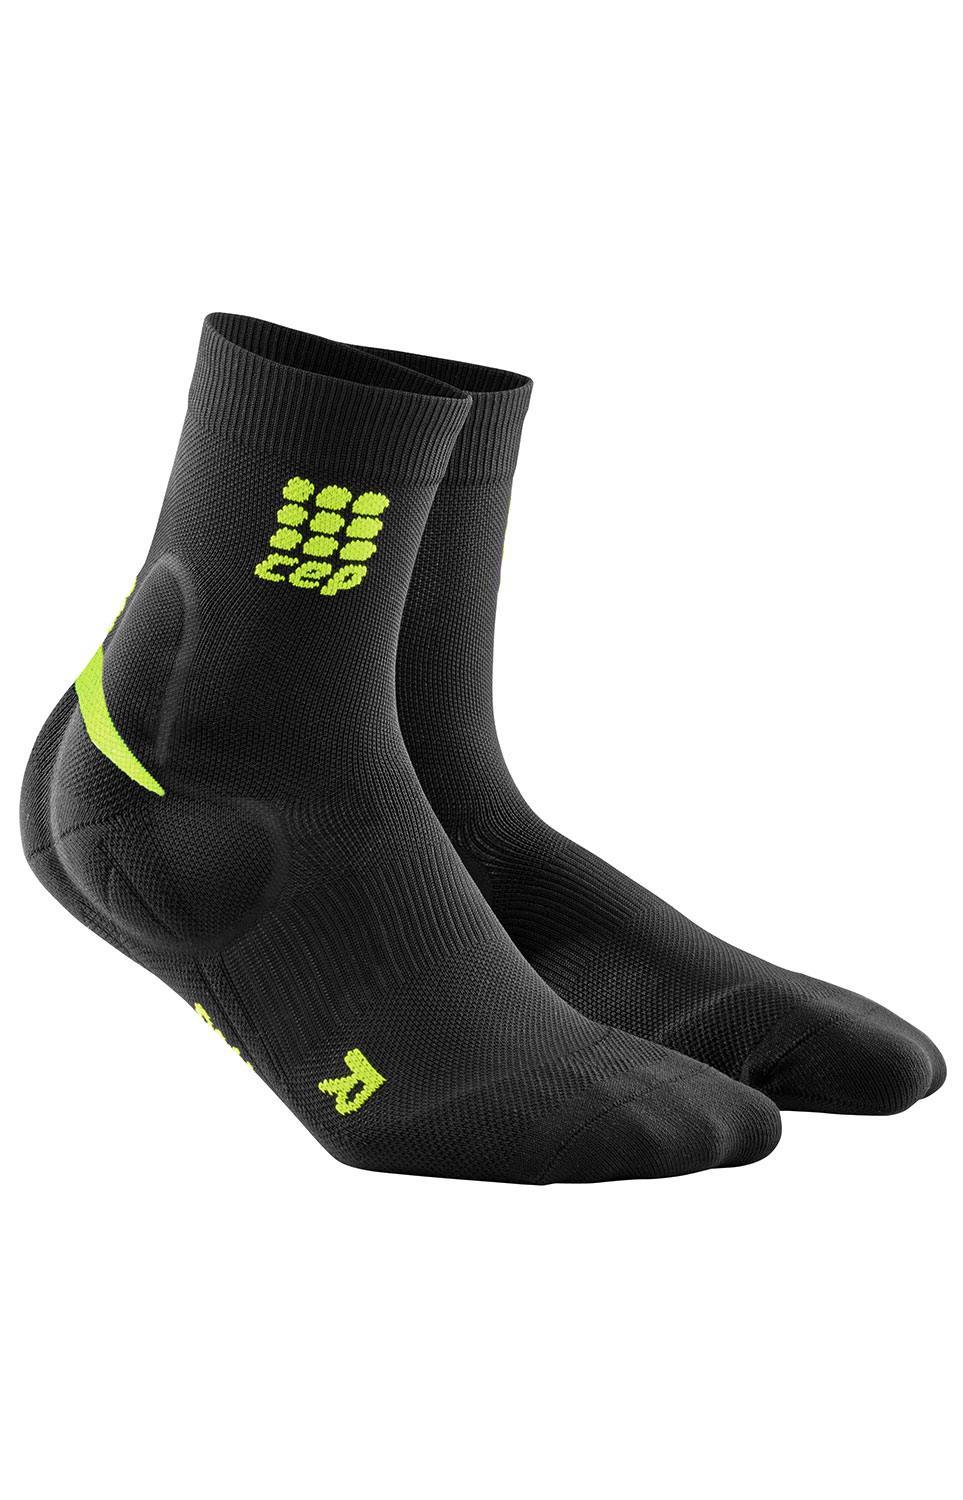 CEP Ortho+ Ankle Support Socks | R&A Cycles